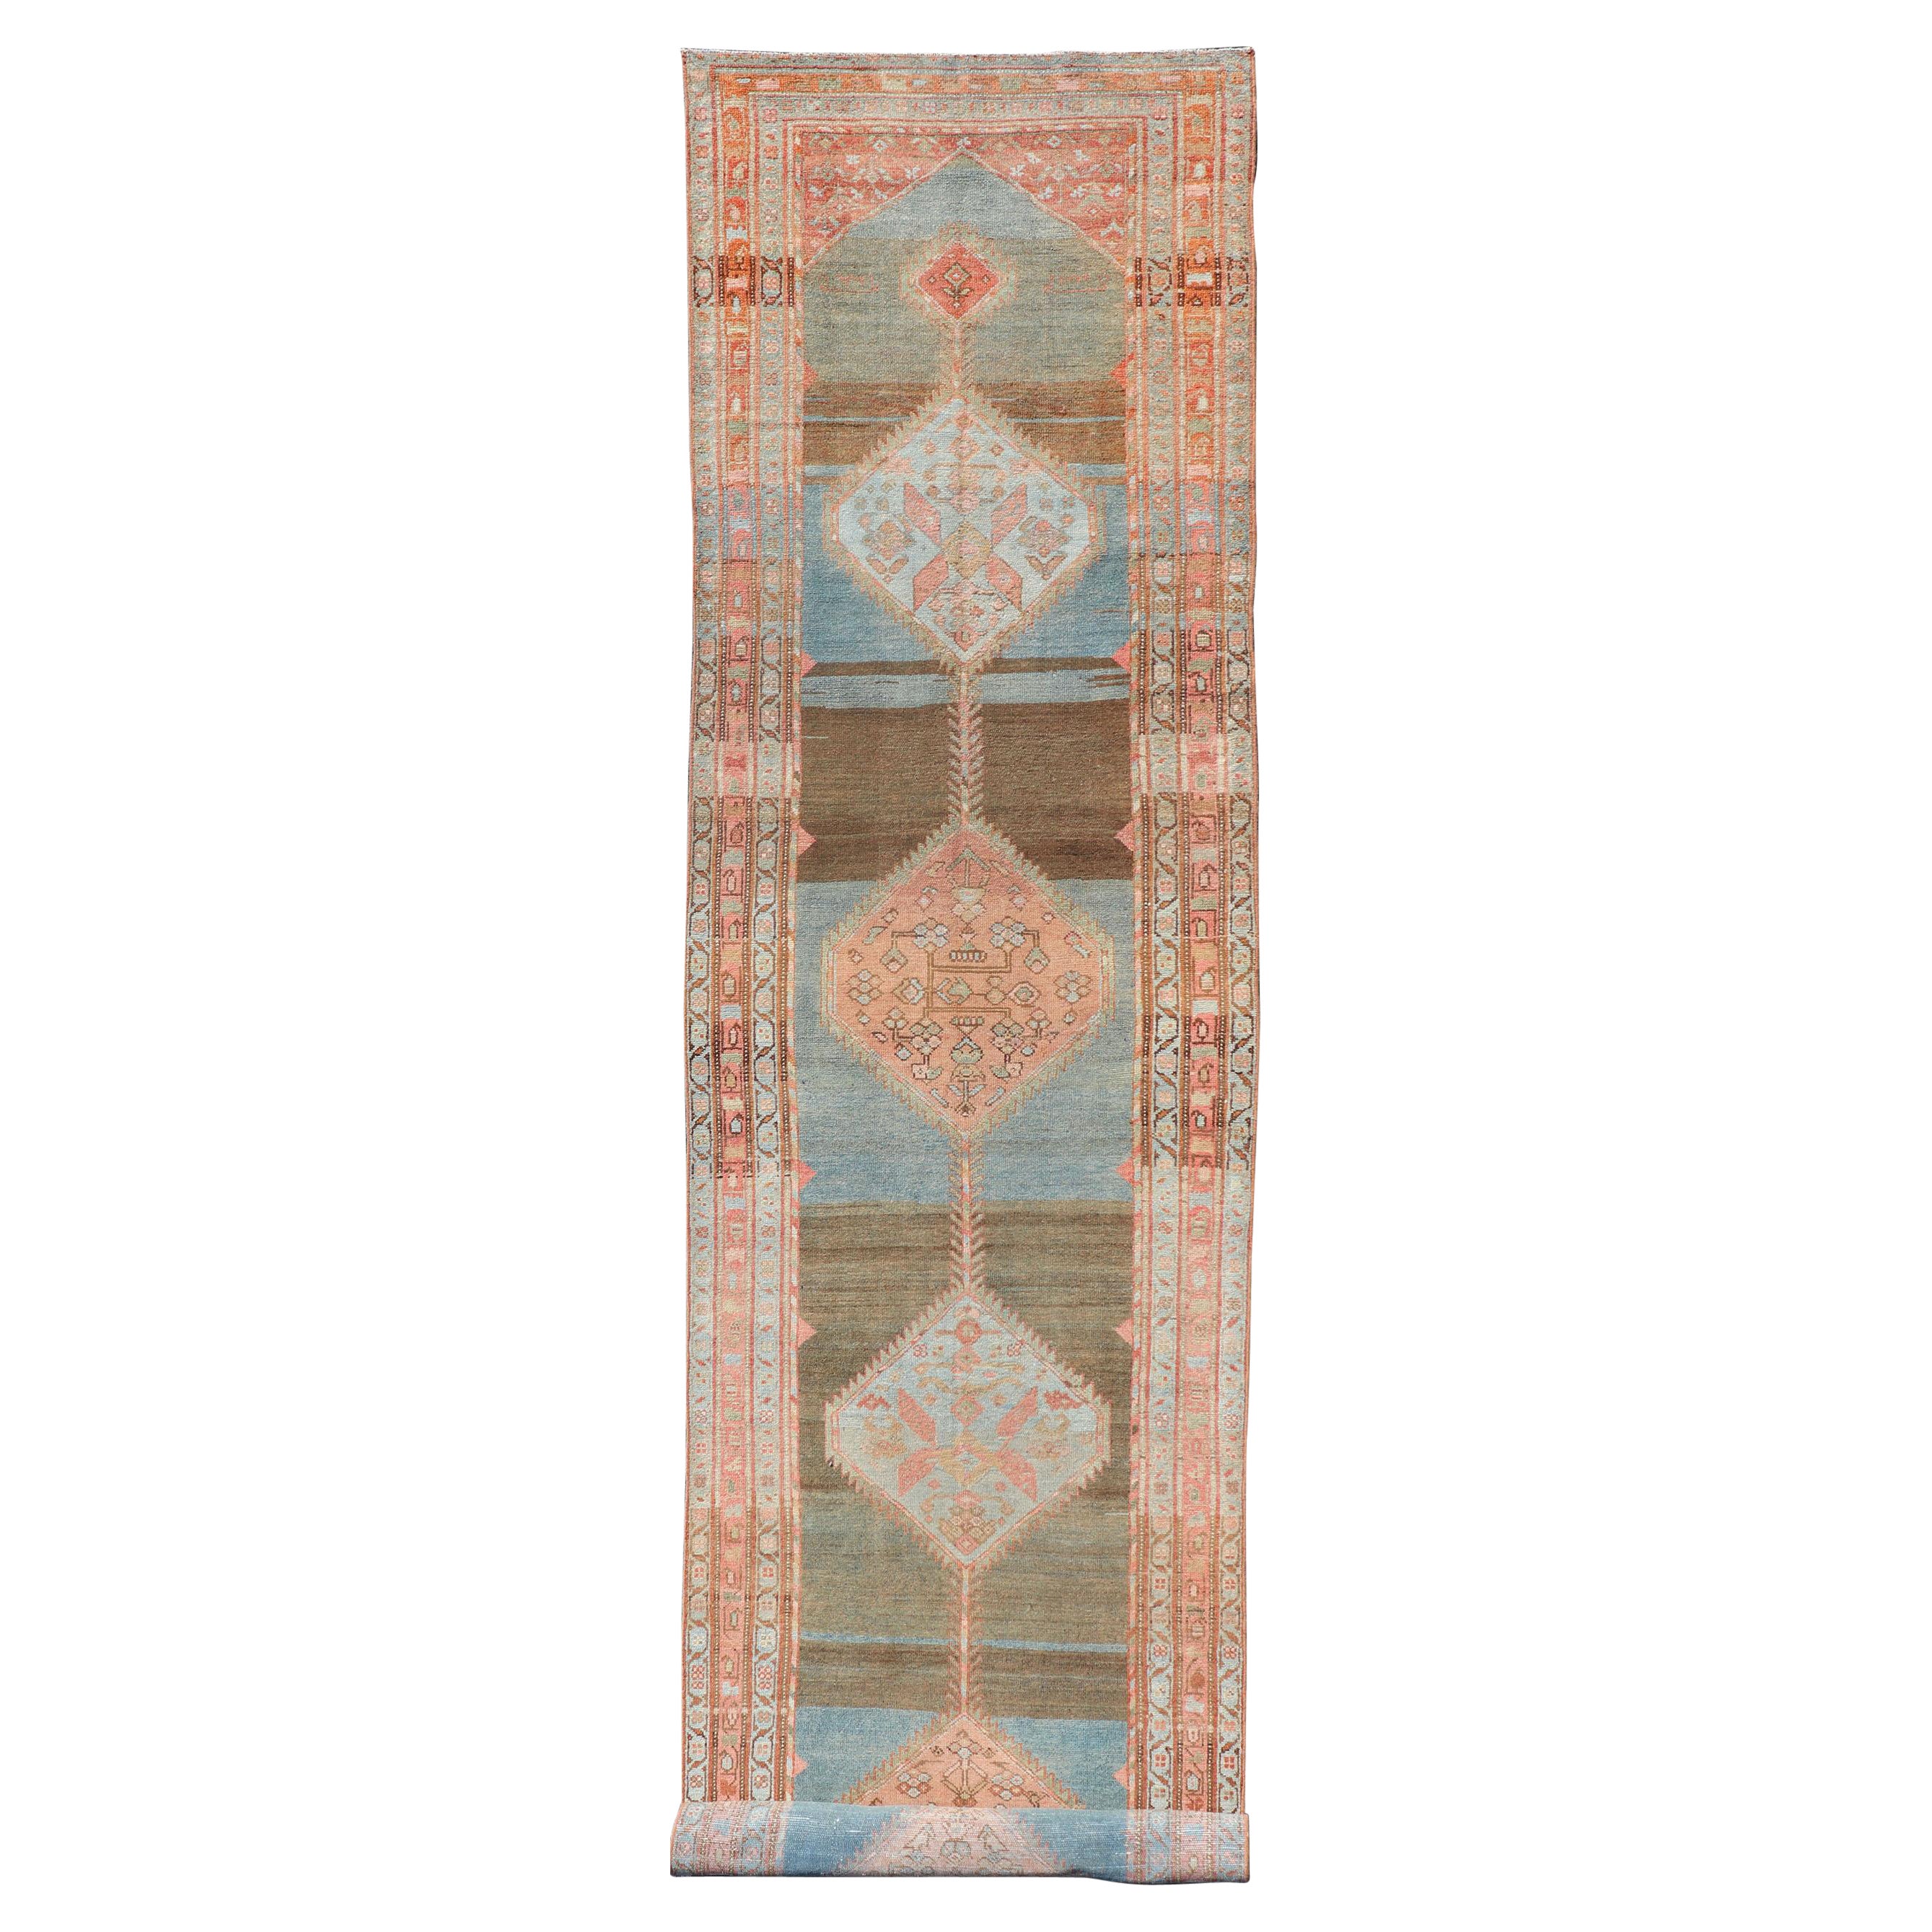 Antique Malayer Runner with Geometric Designs in Gray, Blue, Charcoal & Orange